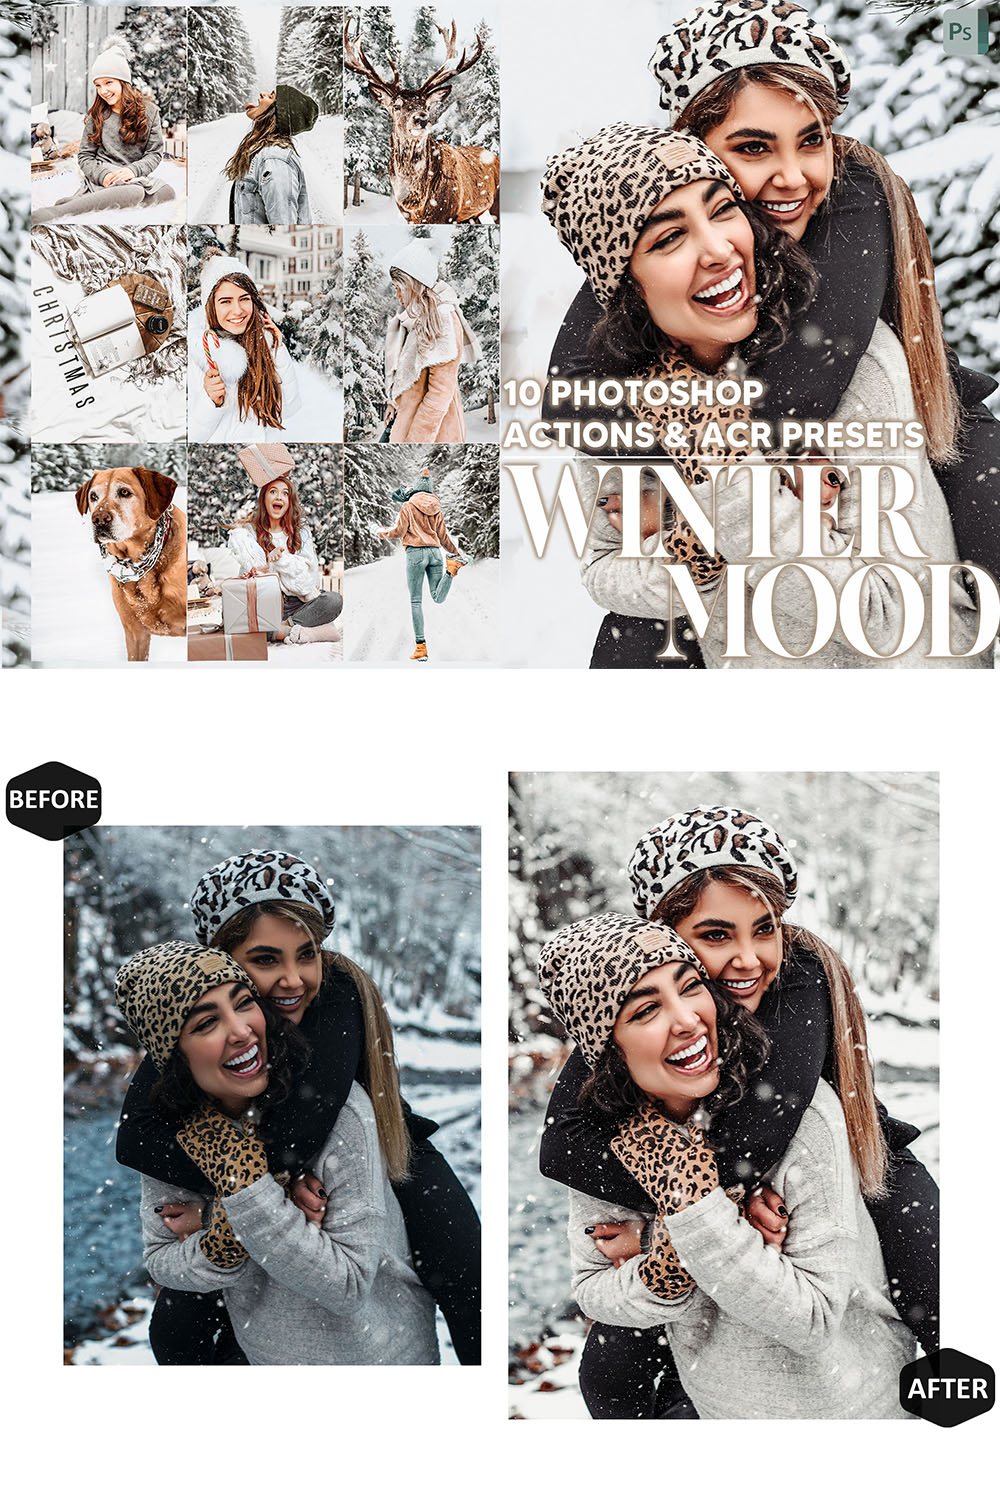 10 Photoshop Actions, Winter Mood Ps Action, Christmas ACR Preset, Bright Ps Filter, Atn Portrait And Lifestyle Theme For Instagram, Blogger pinterest preview image.